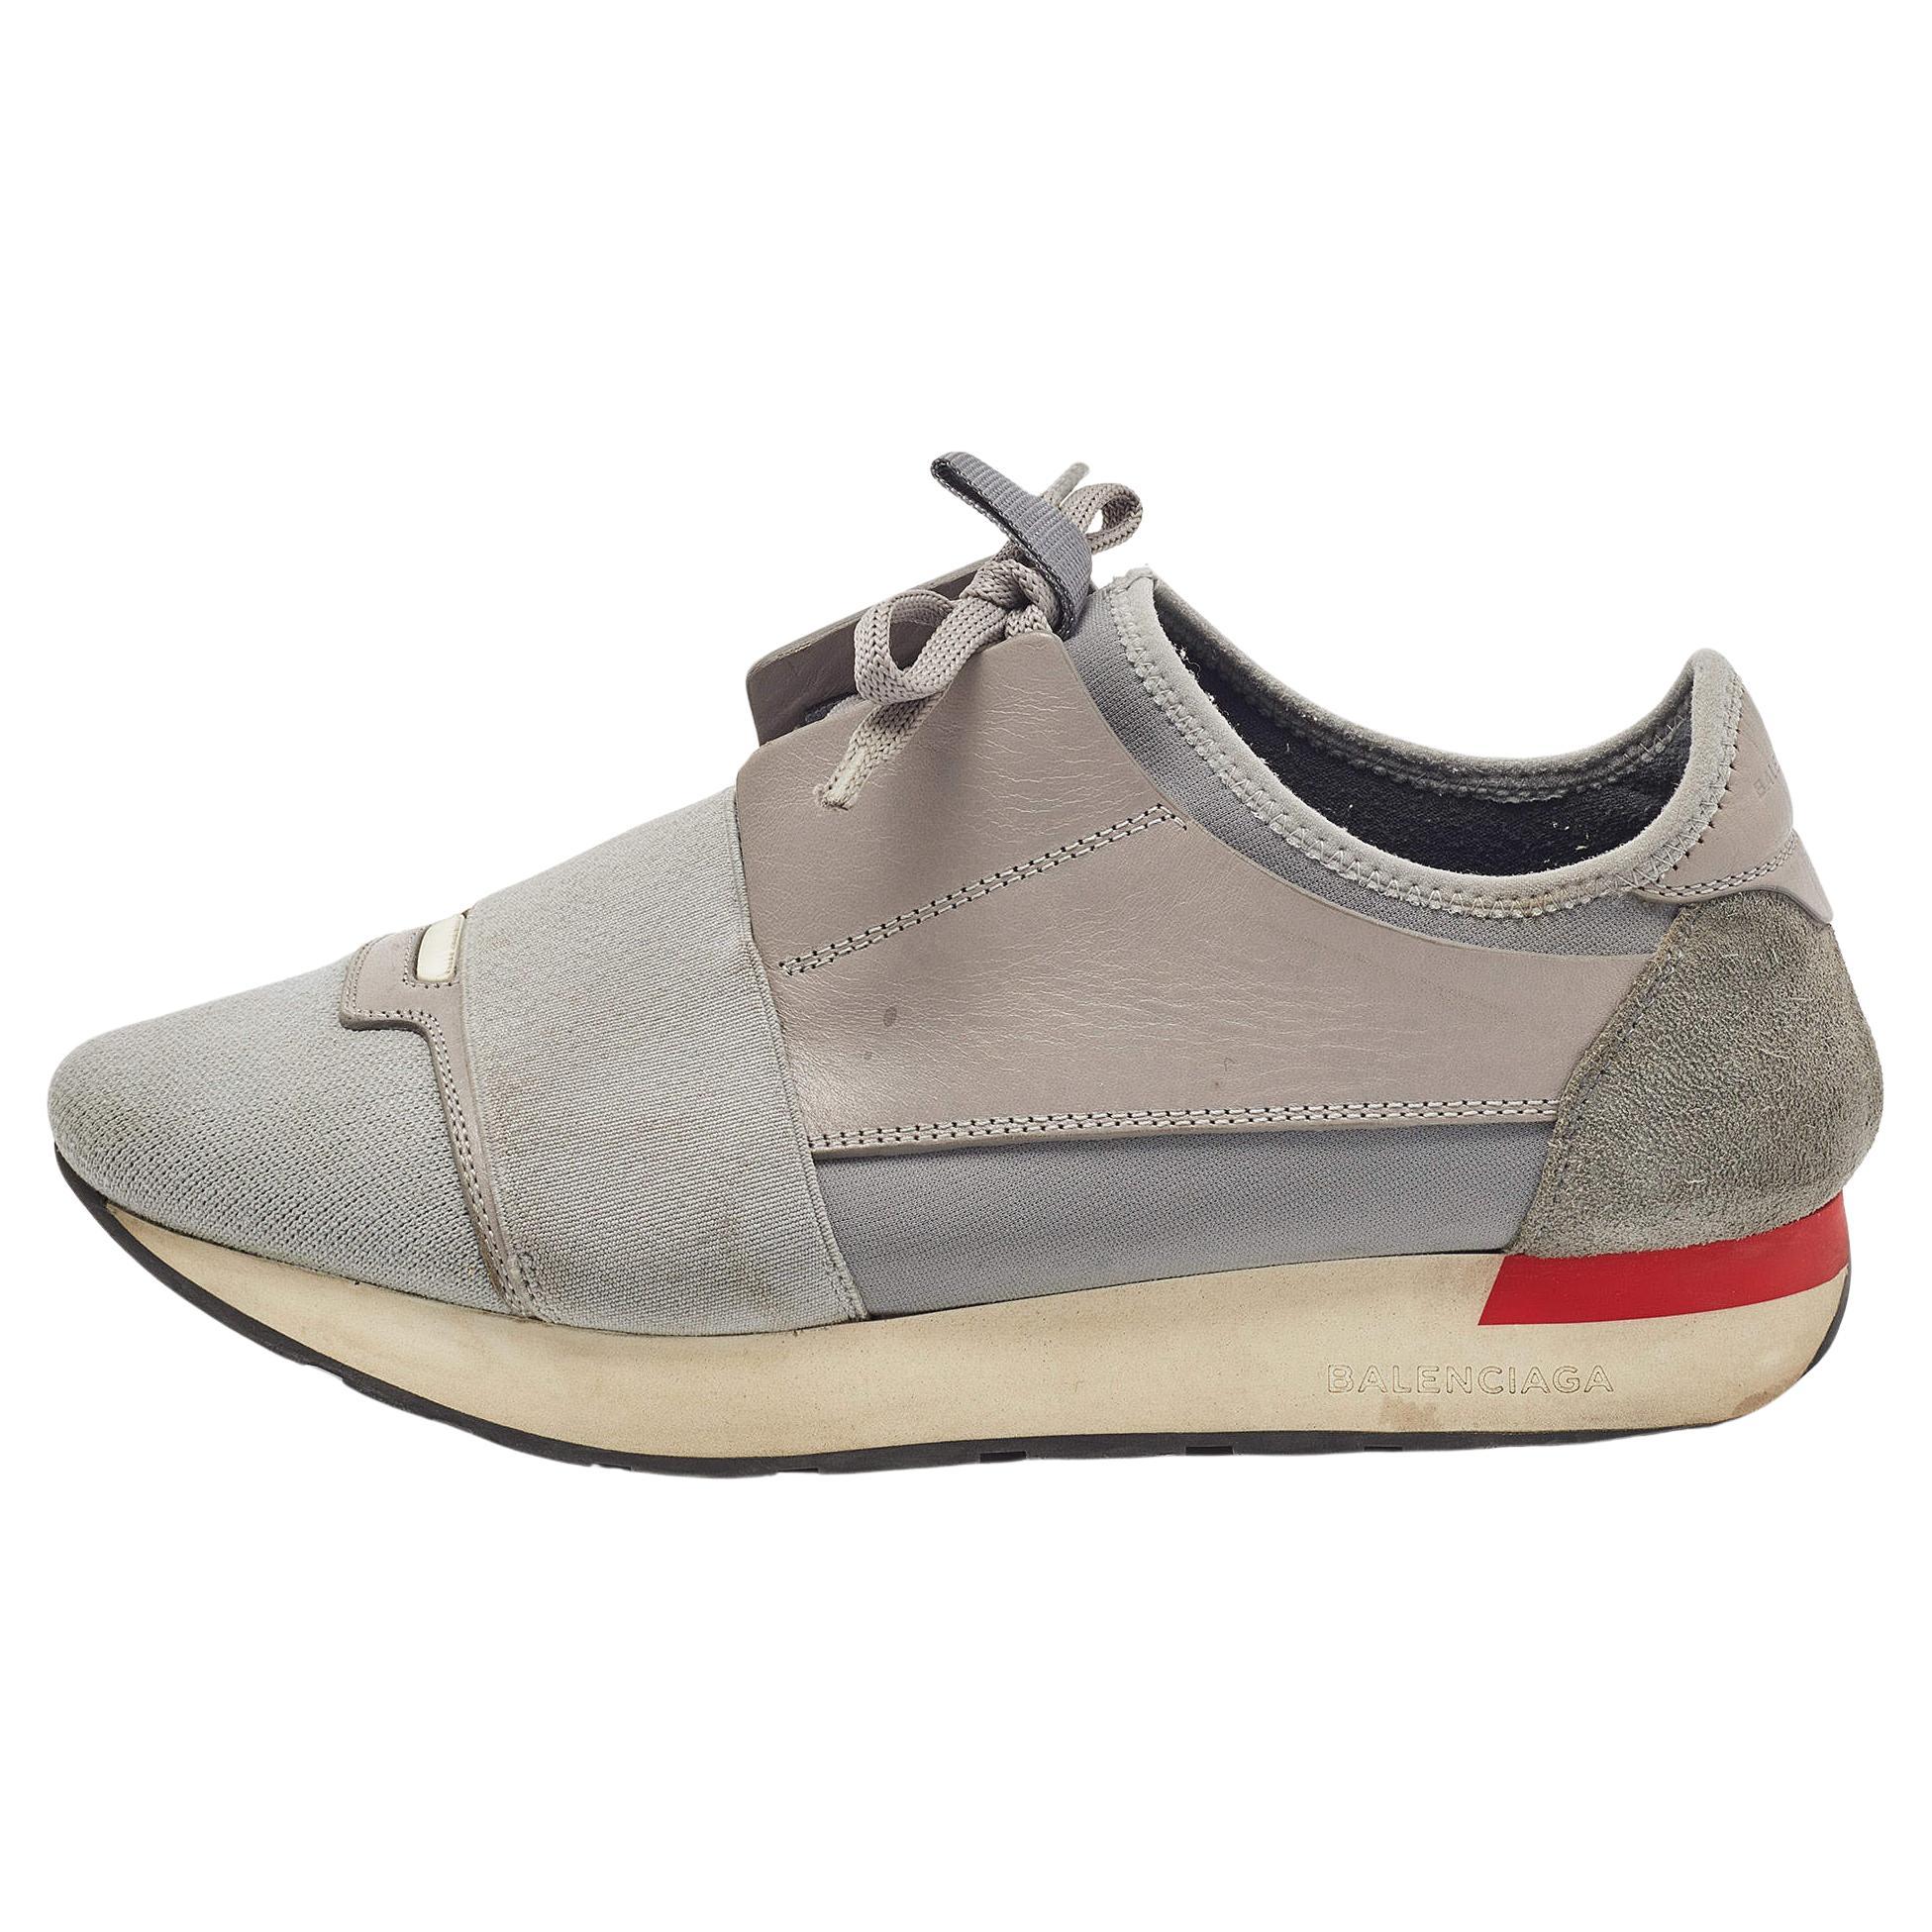 Balenciaga Grey Leather and Knit Fabric Race Runner Sneakers Size 39 For Sale